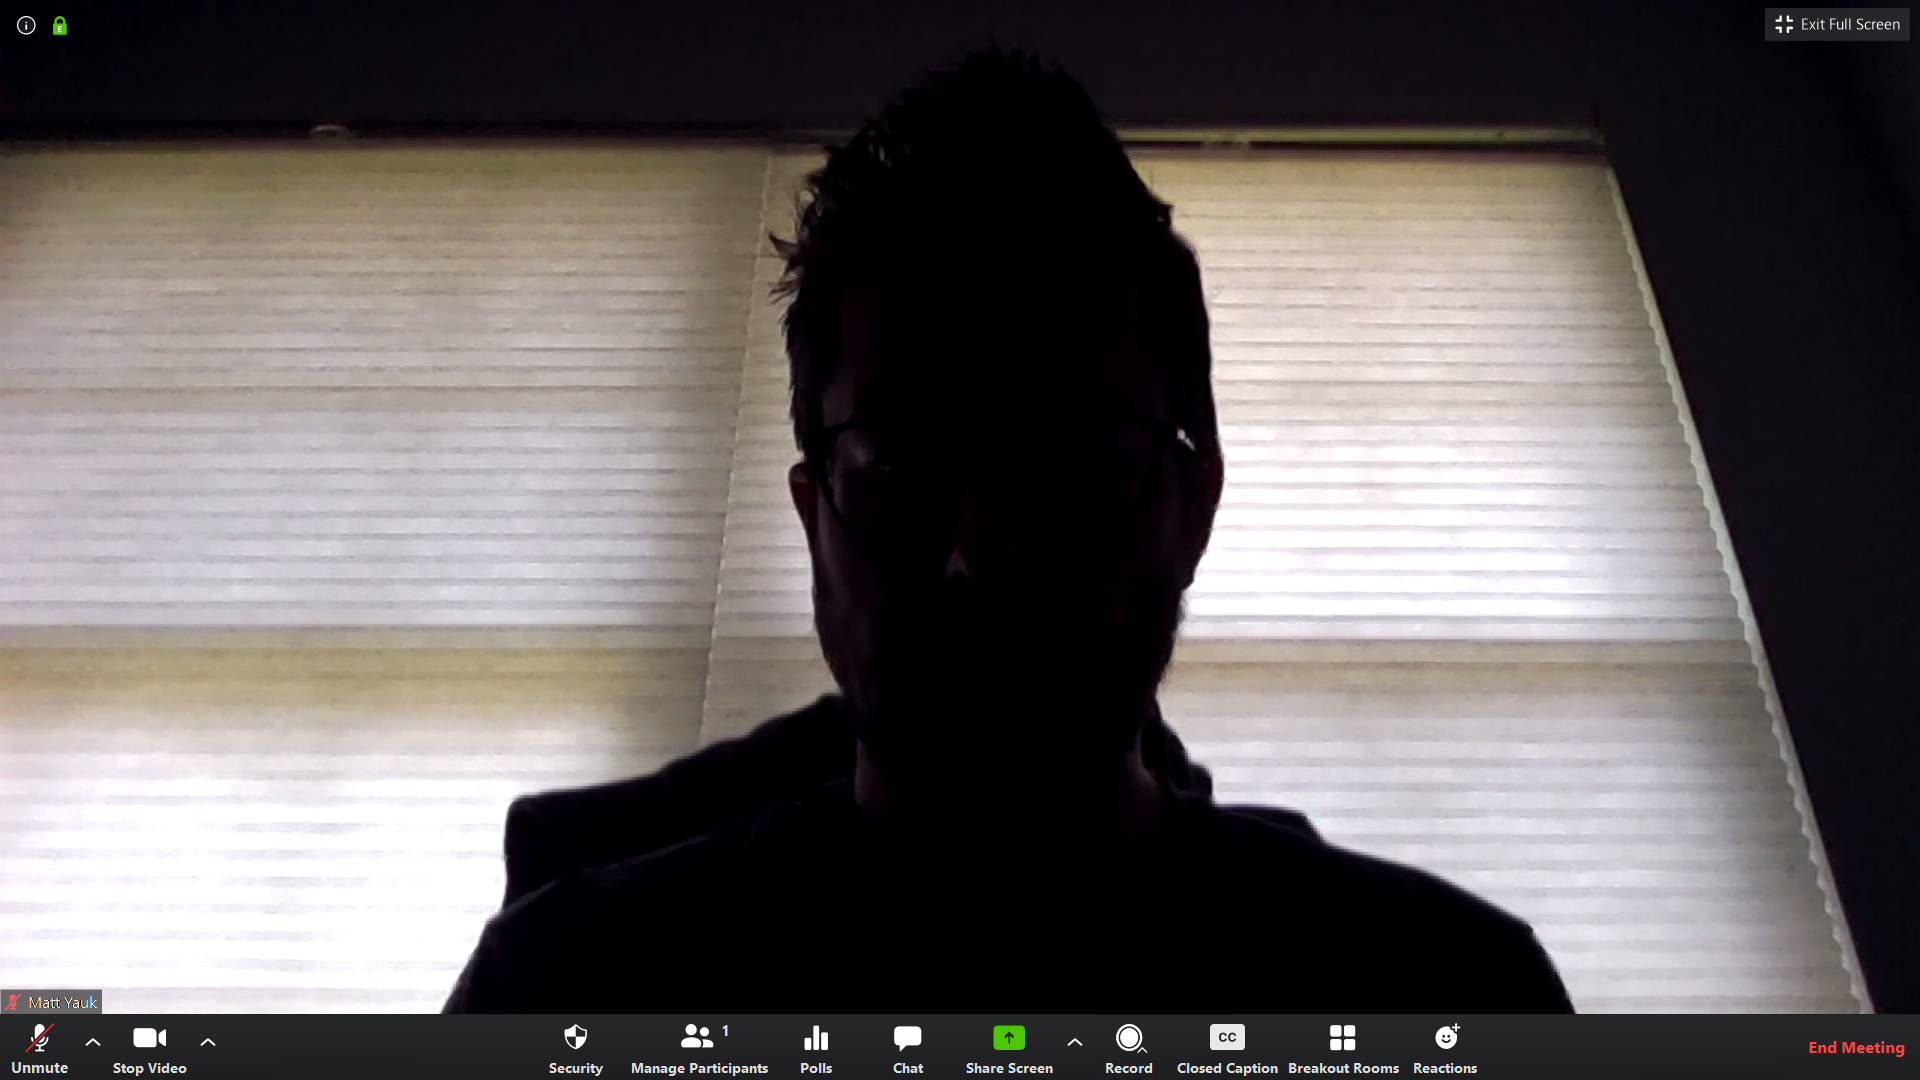 image of a person in a video conference with terrible lighting where their face so dark you can't see it